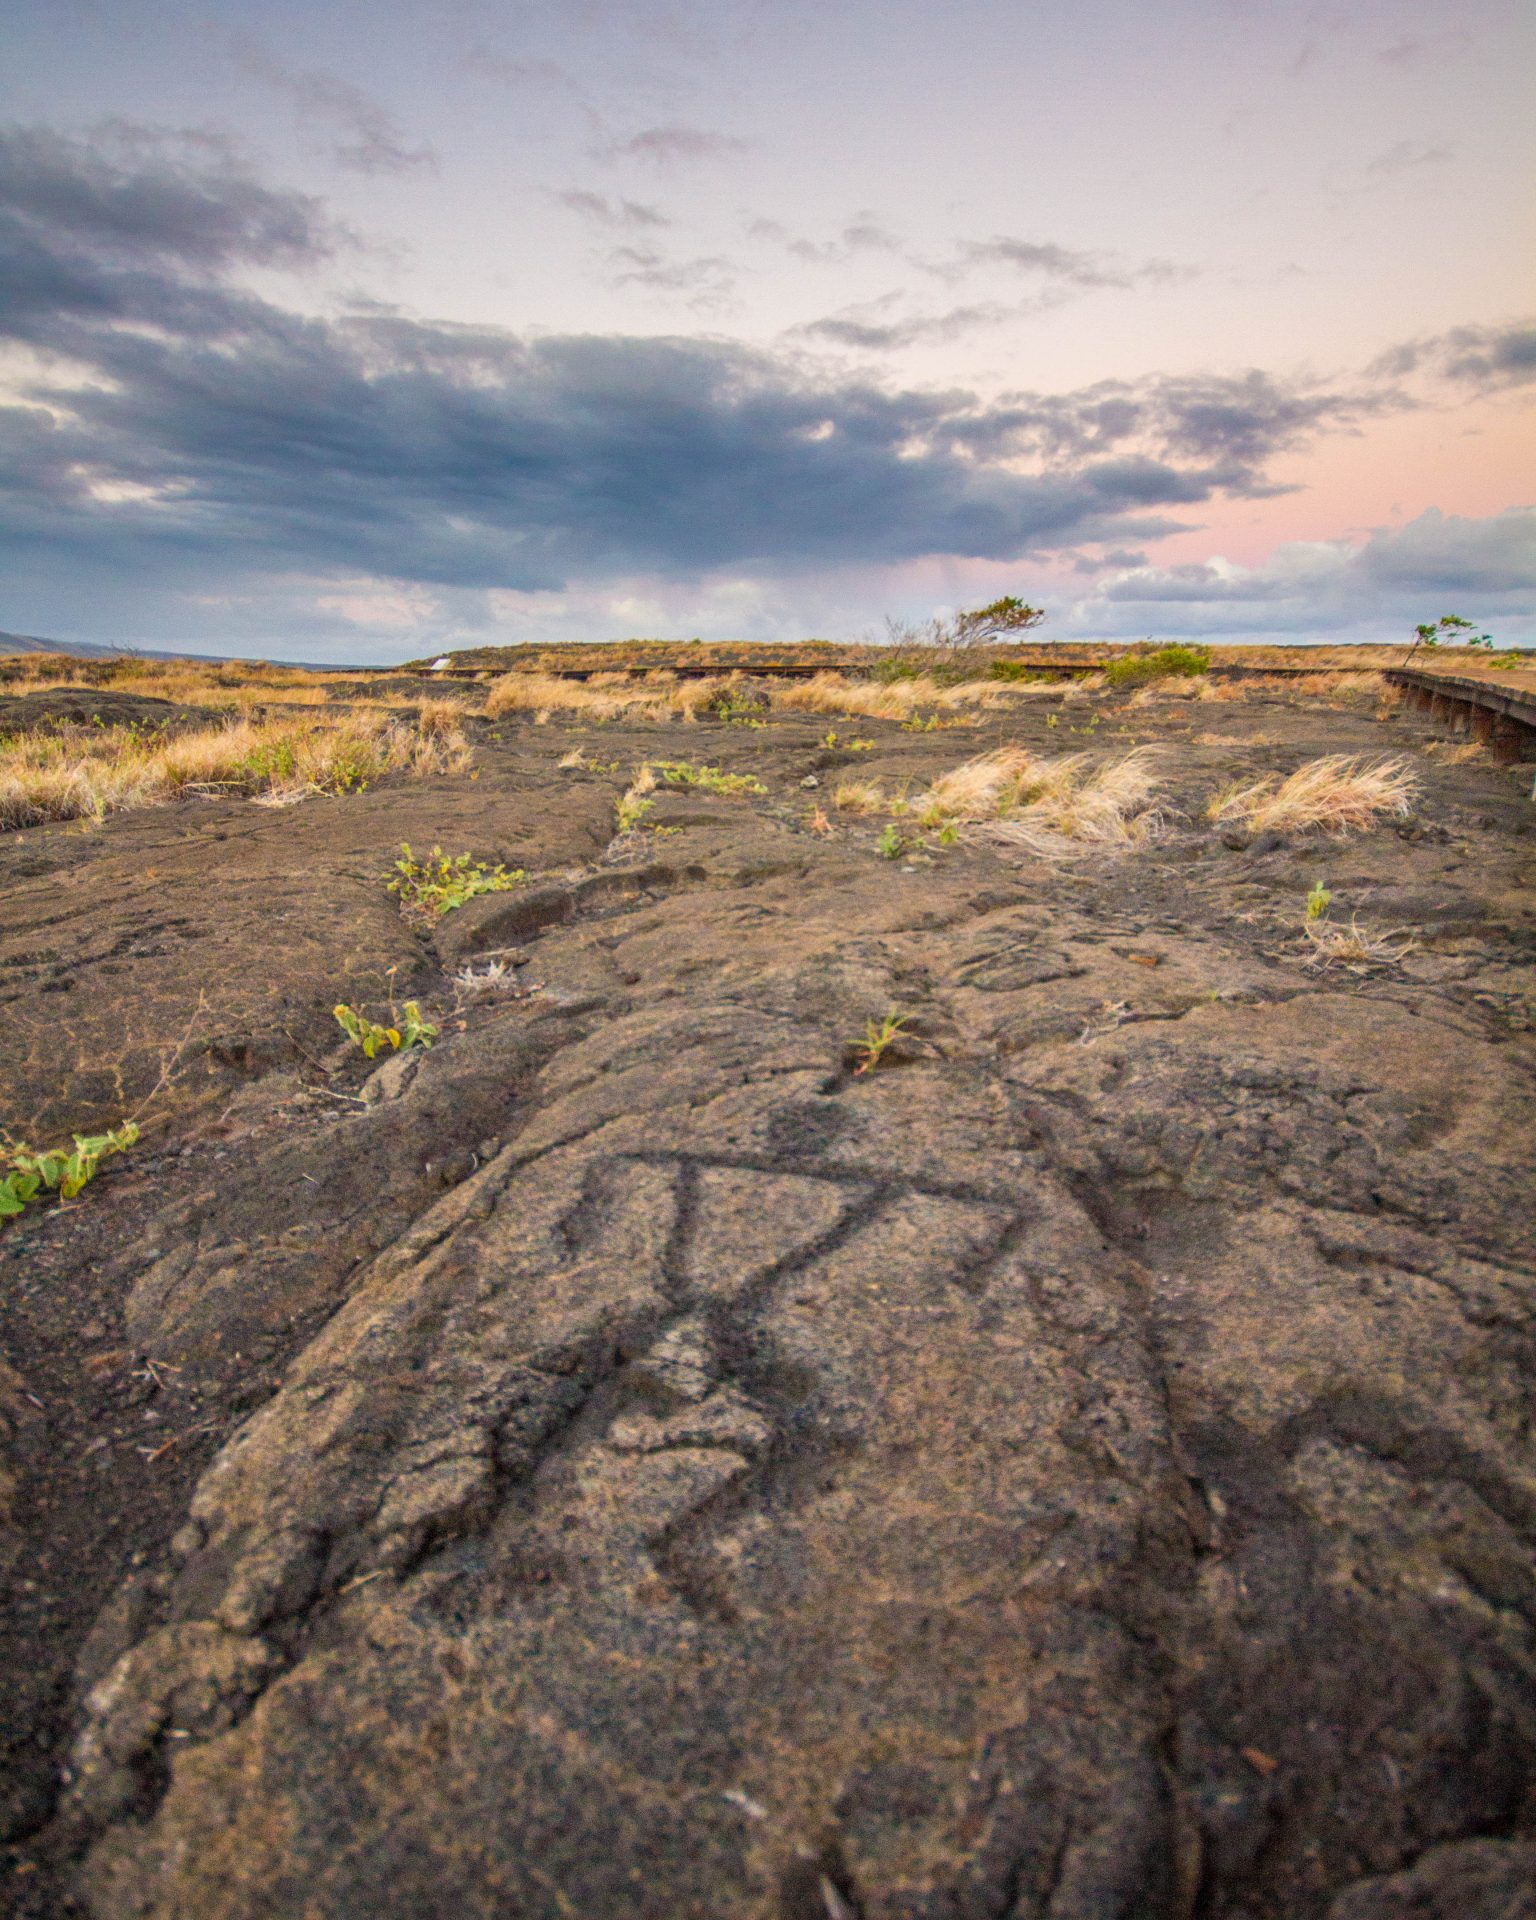 A carving of a man in Pu'u Loa Petrogylph Trail in Hawaii Volcanoes National Park.